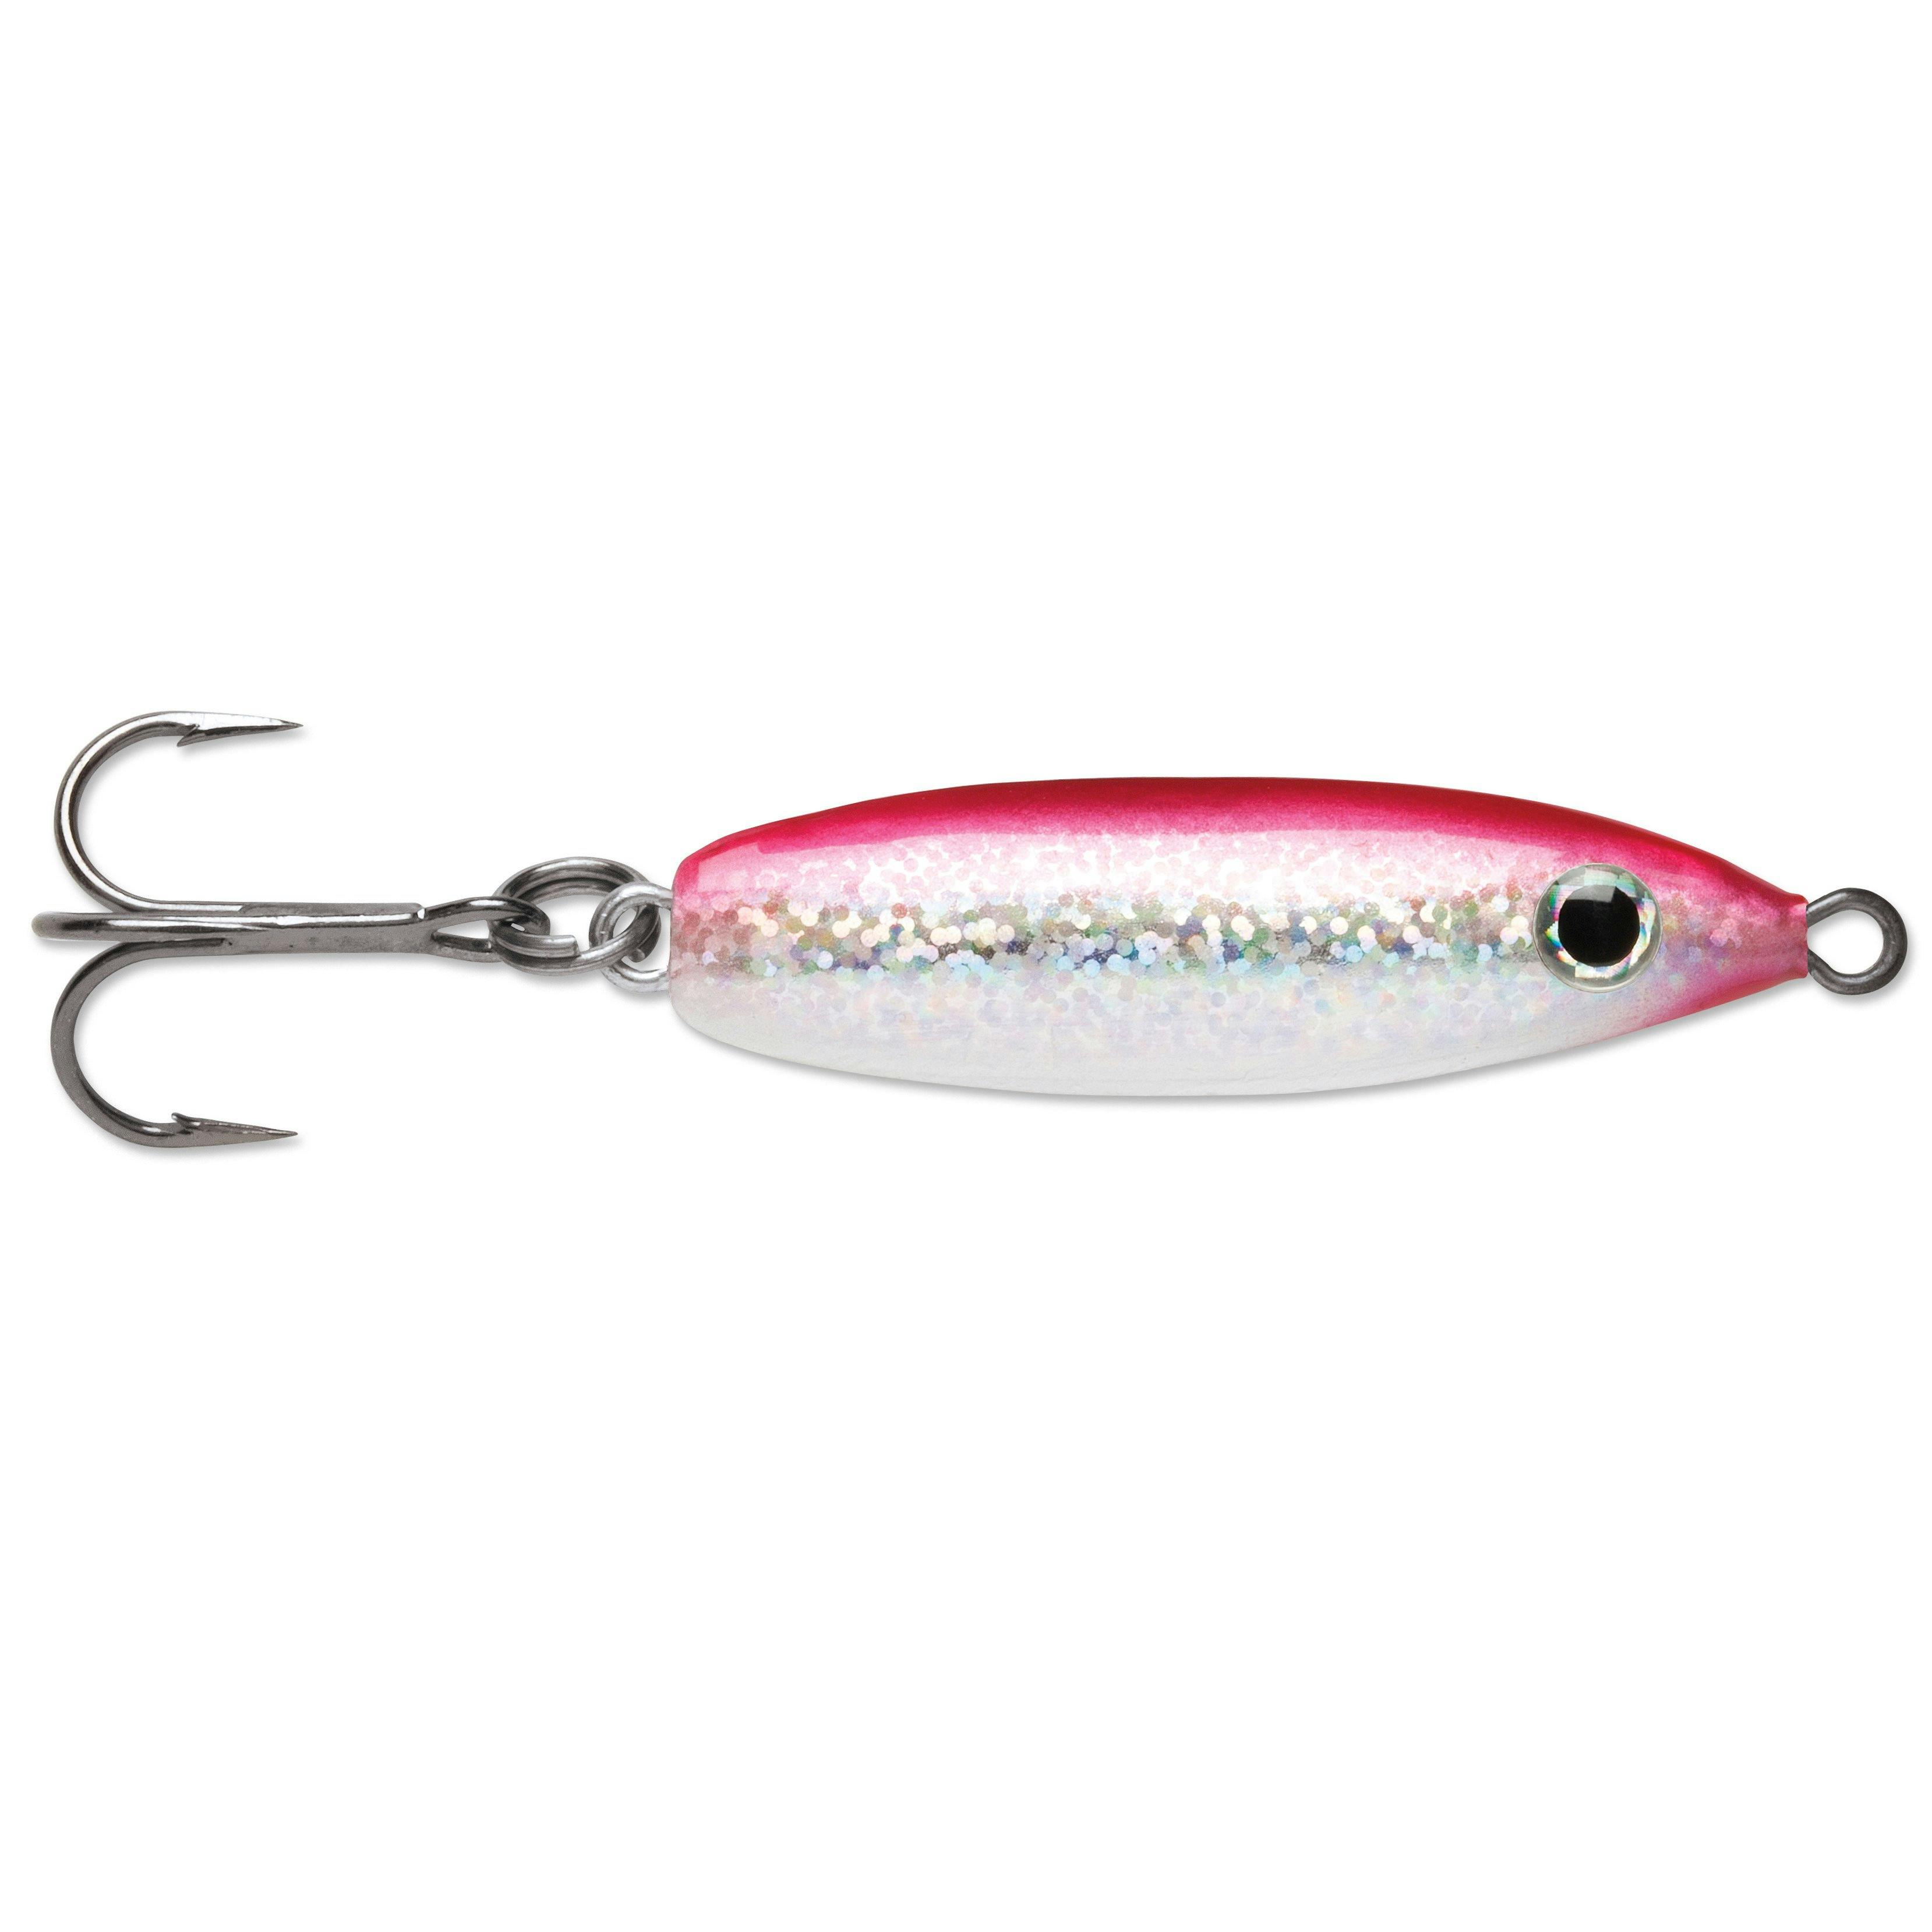 VMC Rattle Spoon   1/4 oz / Glow Red Shiner